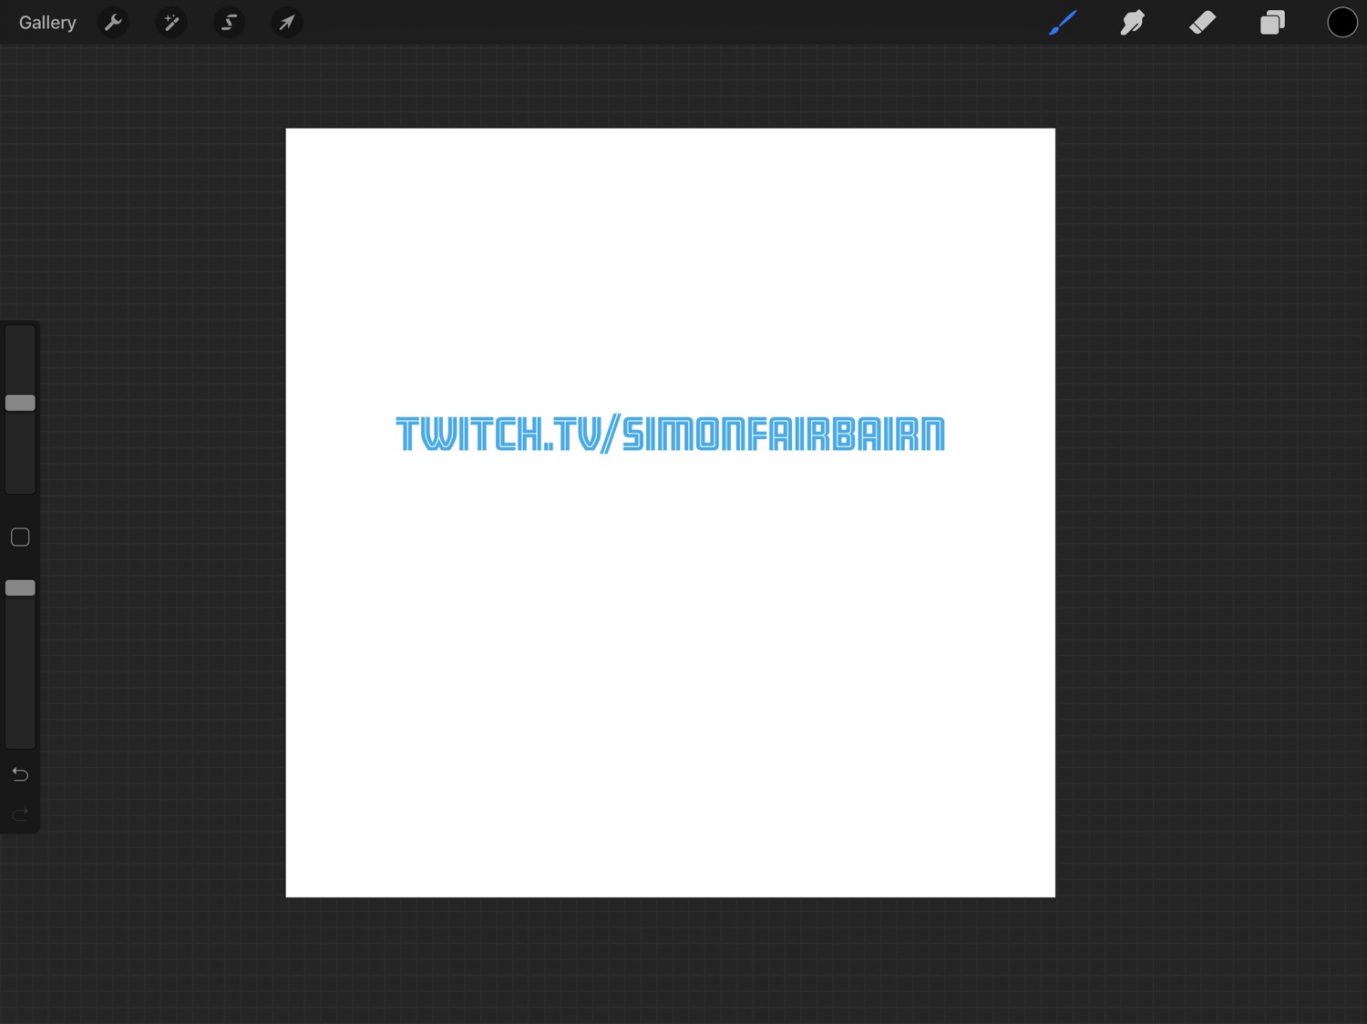 The Procreate app with the layer mask applied, which has caused the blue background to turn in to blue text on a white background. The blue text says twitch.tv/simonfairbairn. 